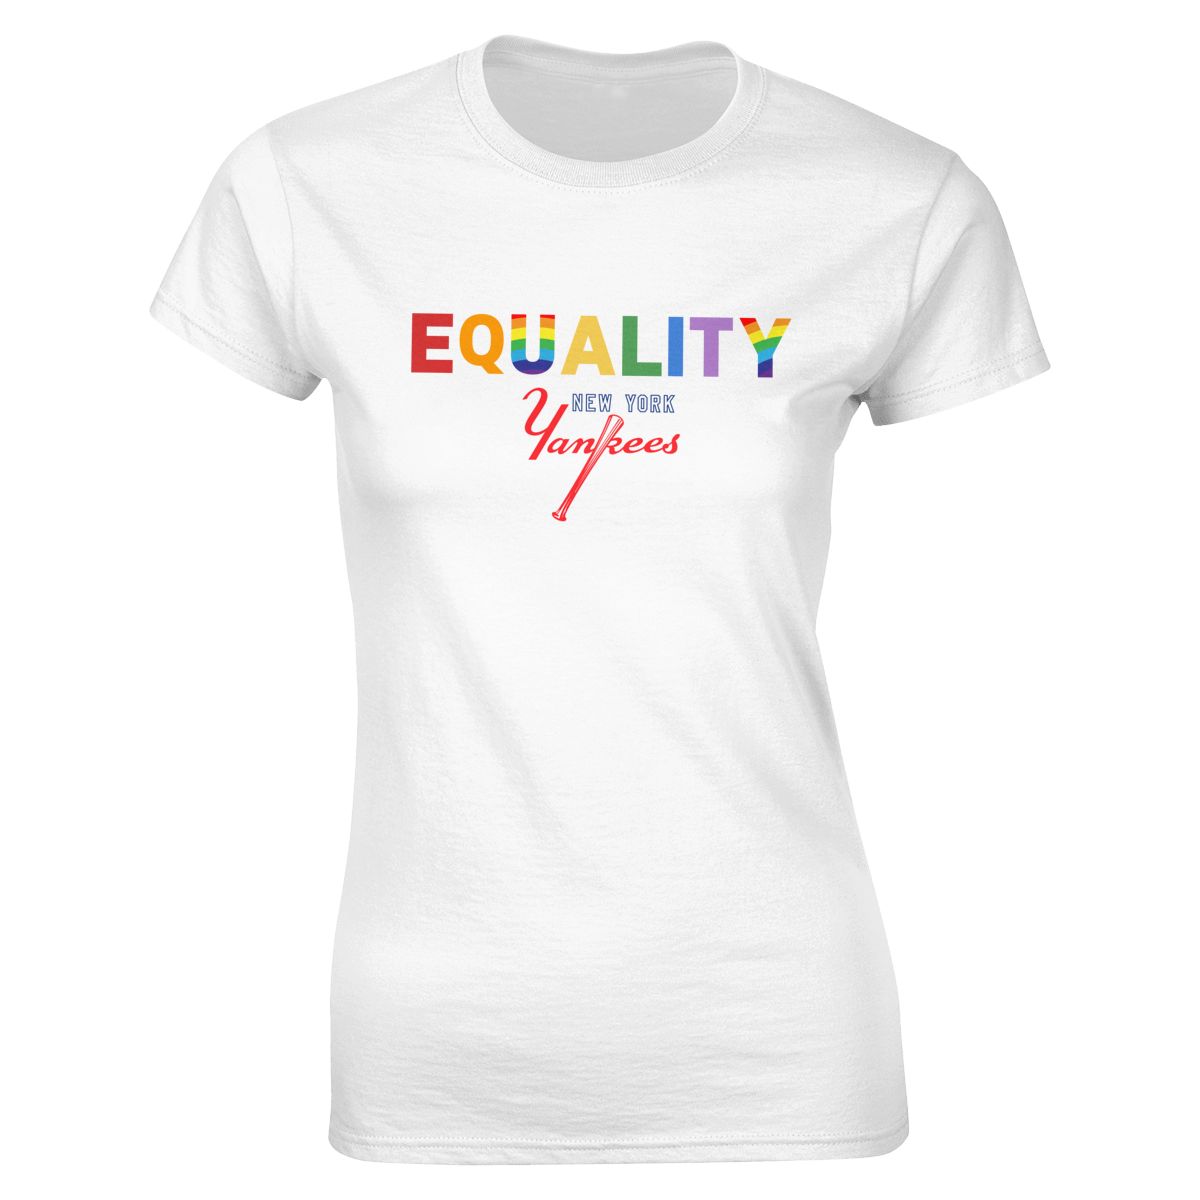 New York Yankees Rainbow Equality Pride Women's Classic-Fit T-Shirt